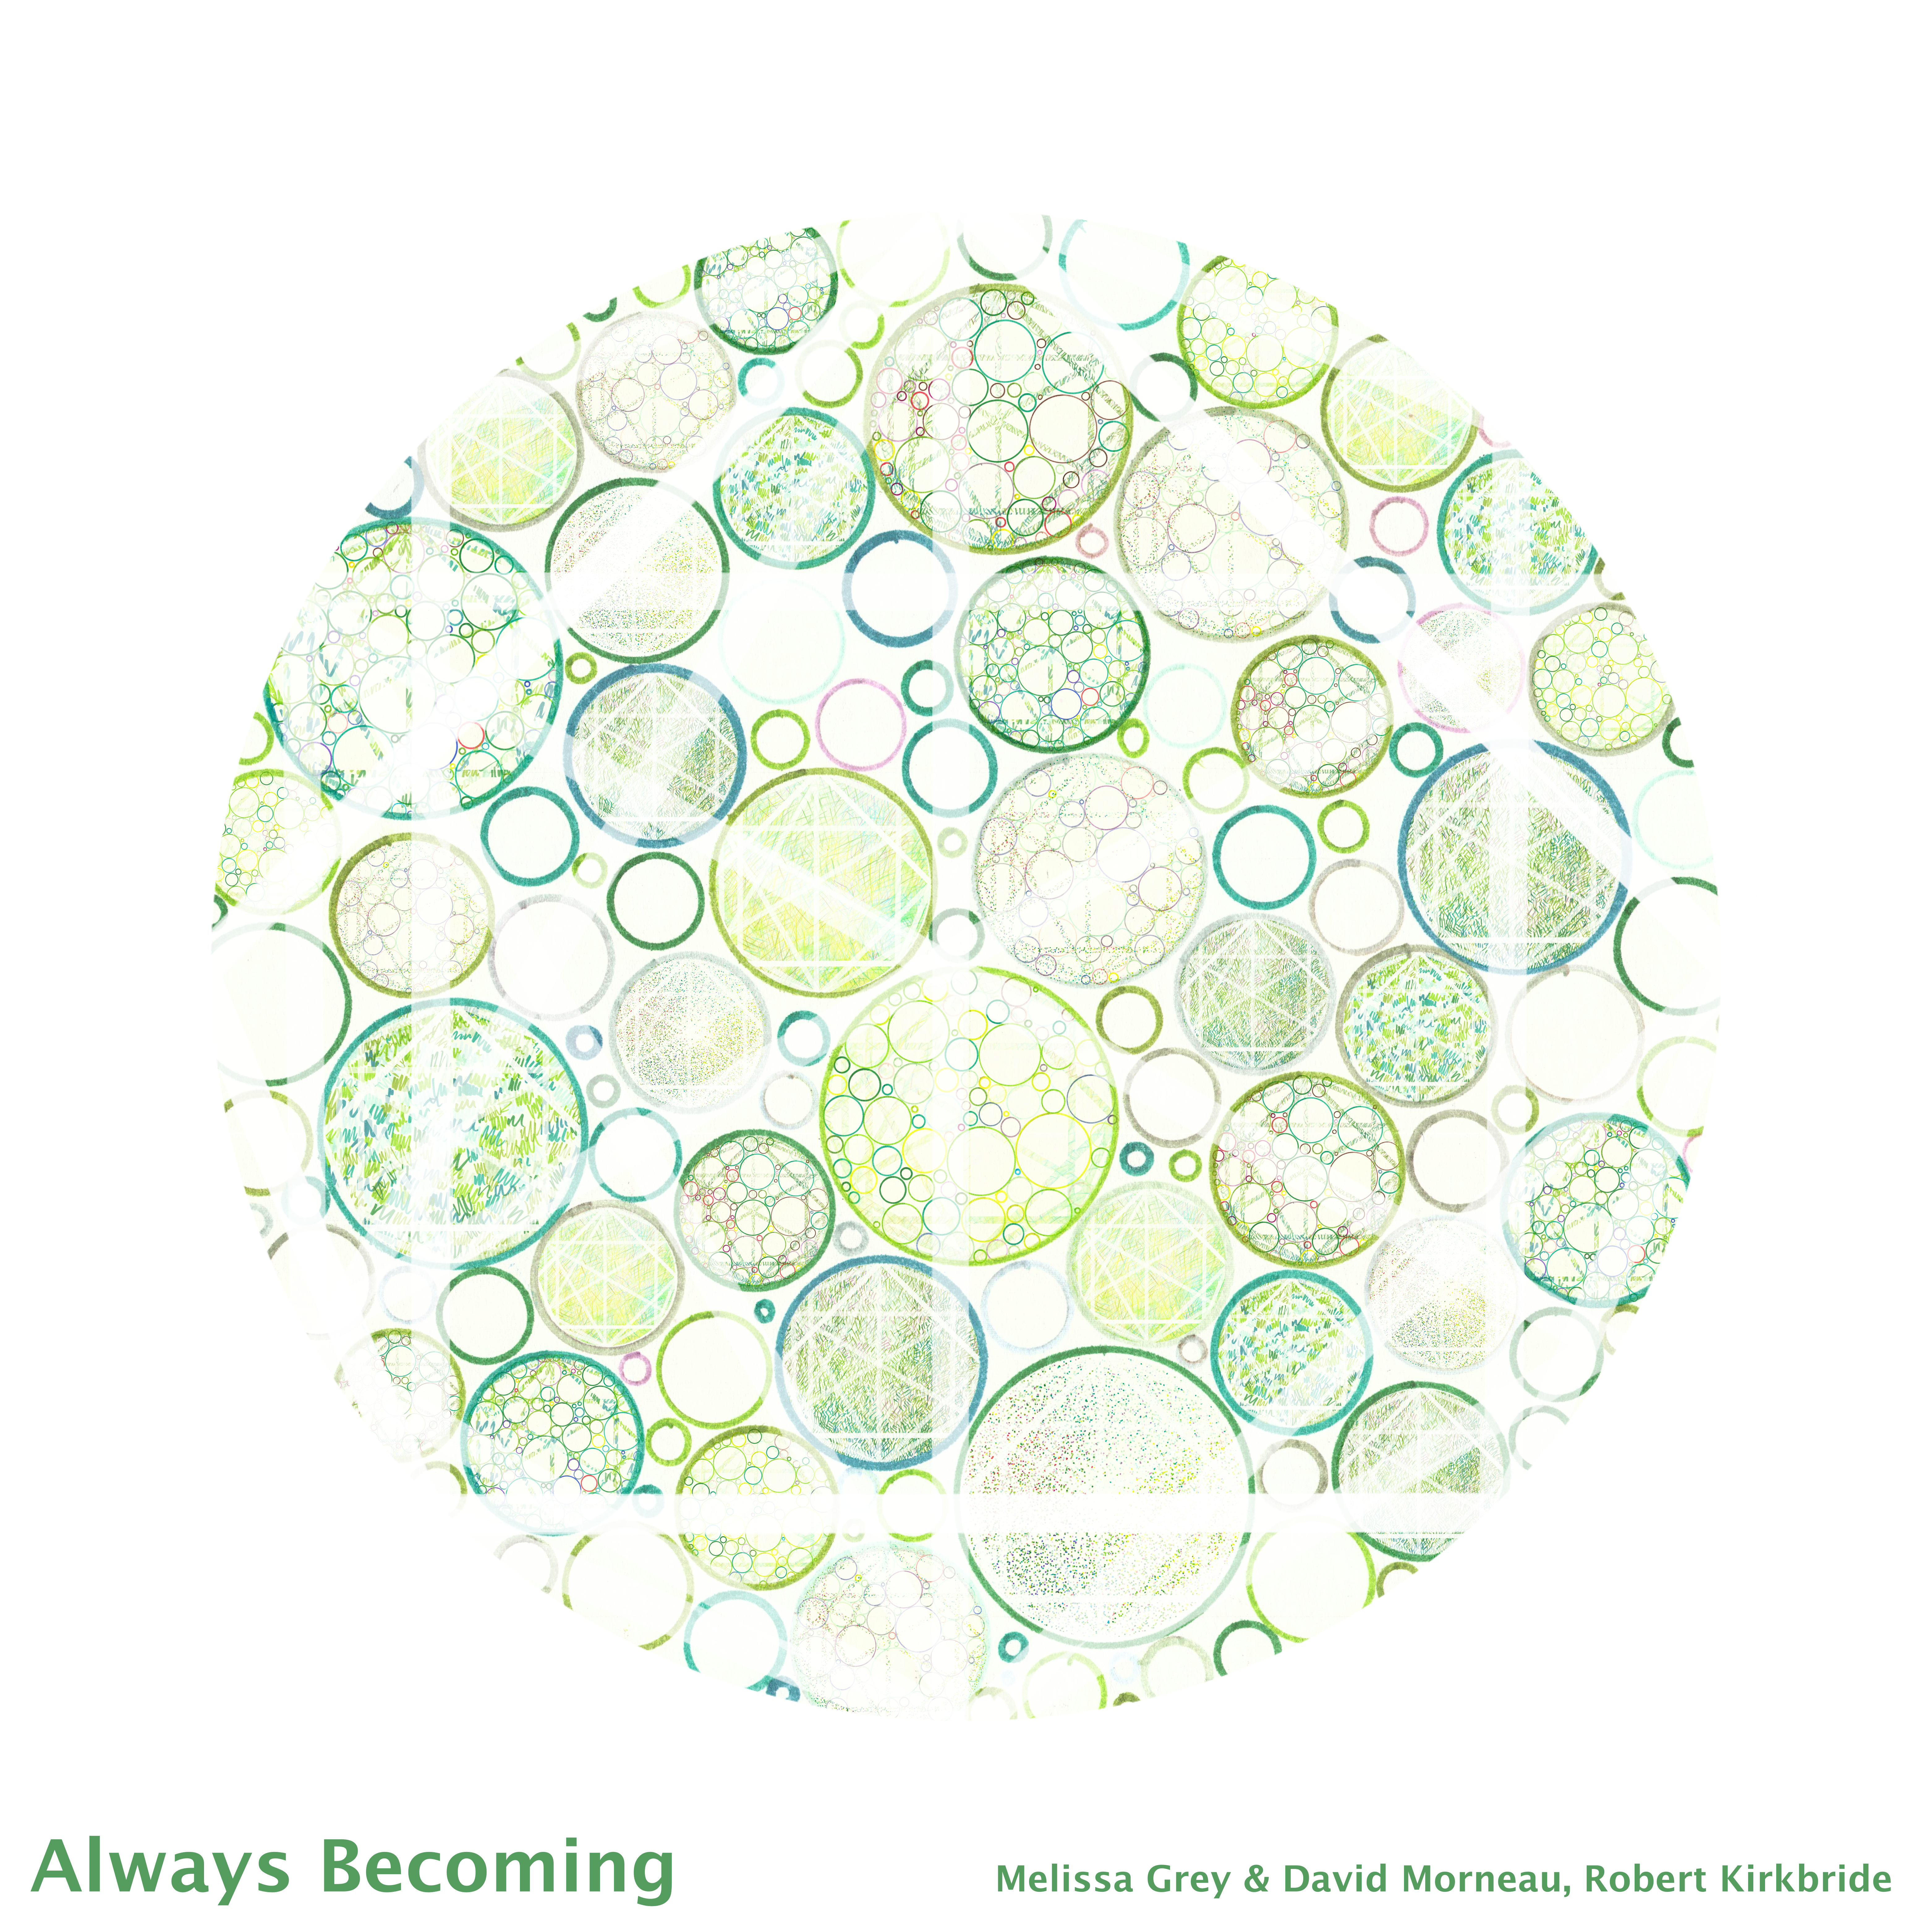 ‘Melissa Grey’ & ‘David Morneau’ join ‘Robert Kirkbride’ for a sonic tapestry of sunshine pop and dreampop on stunning new E.P ‘Always Becoming’.